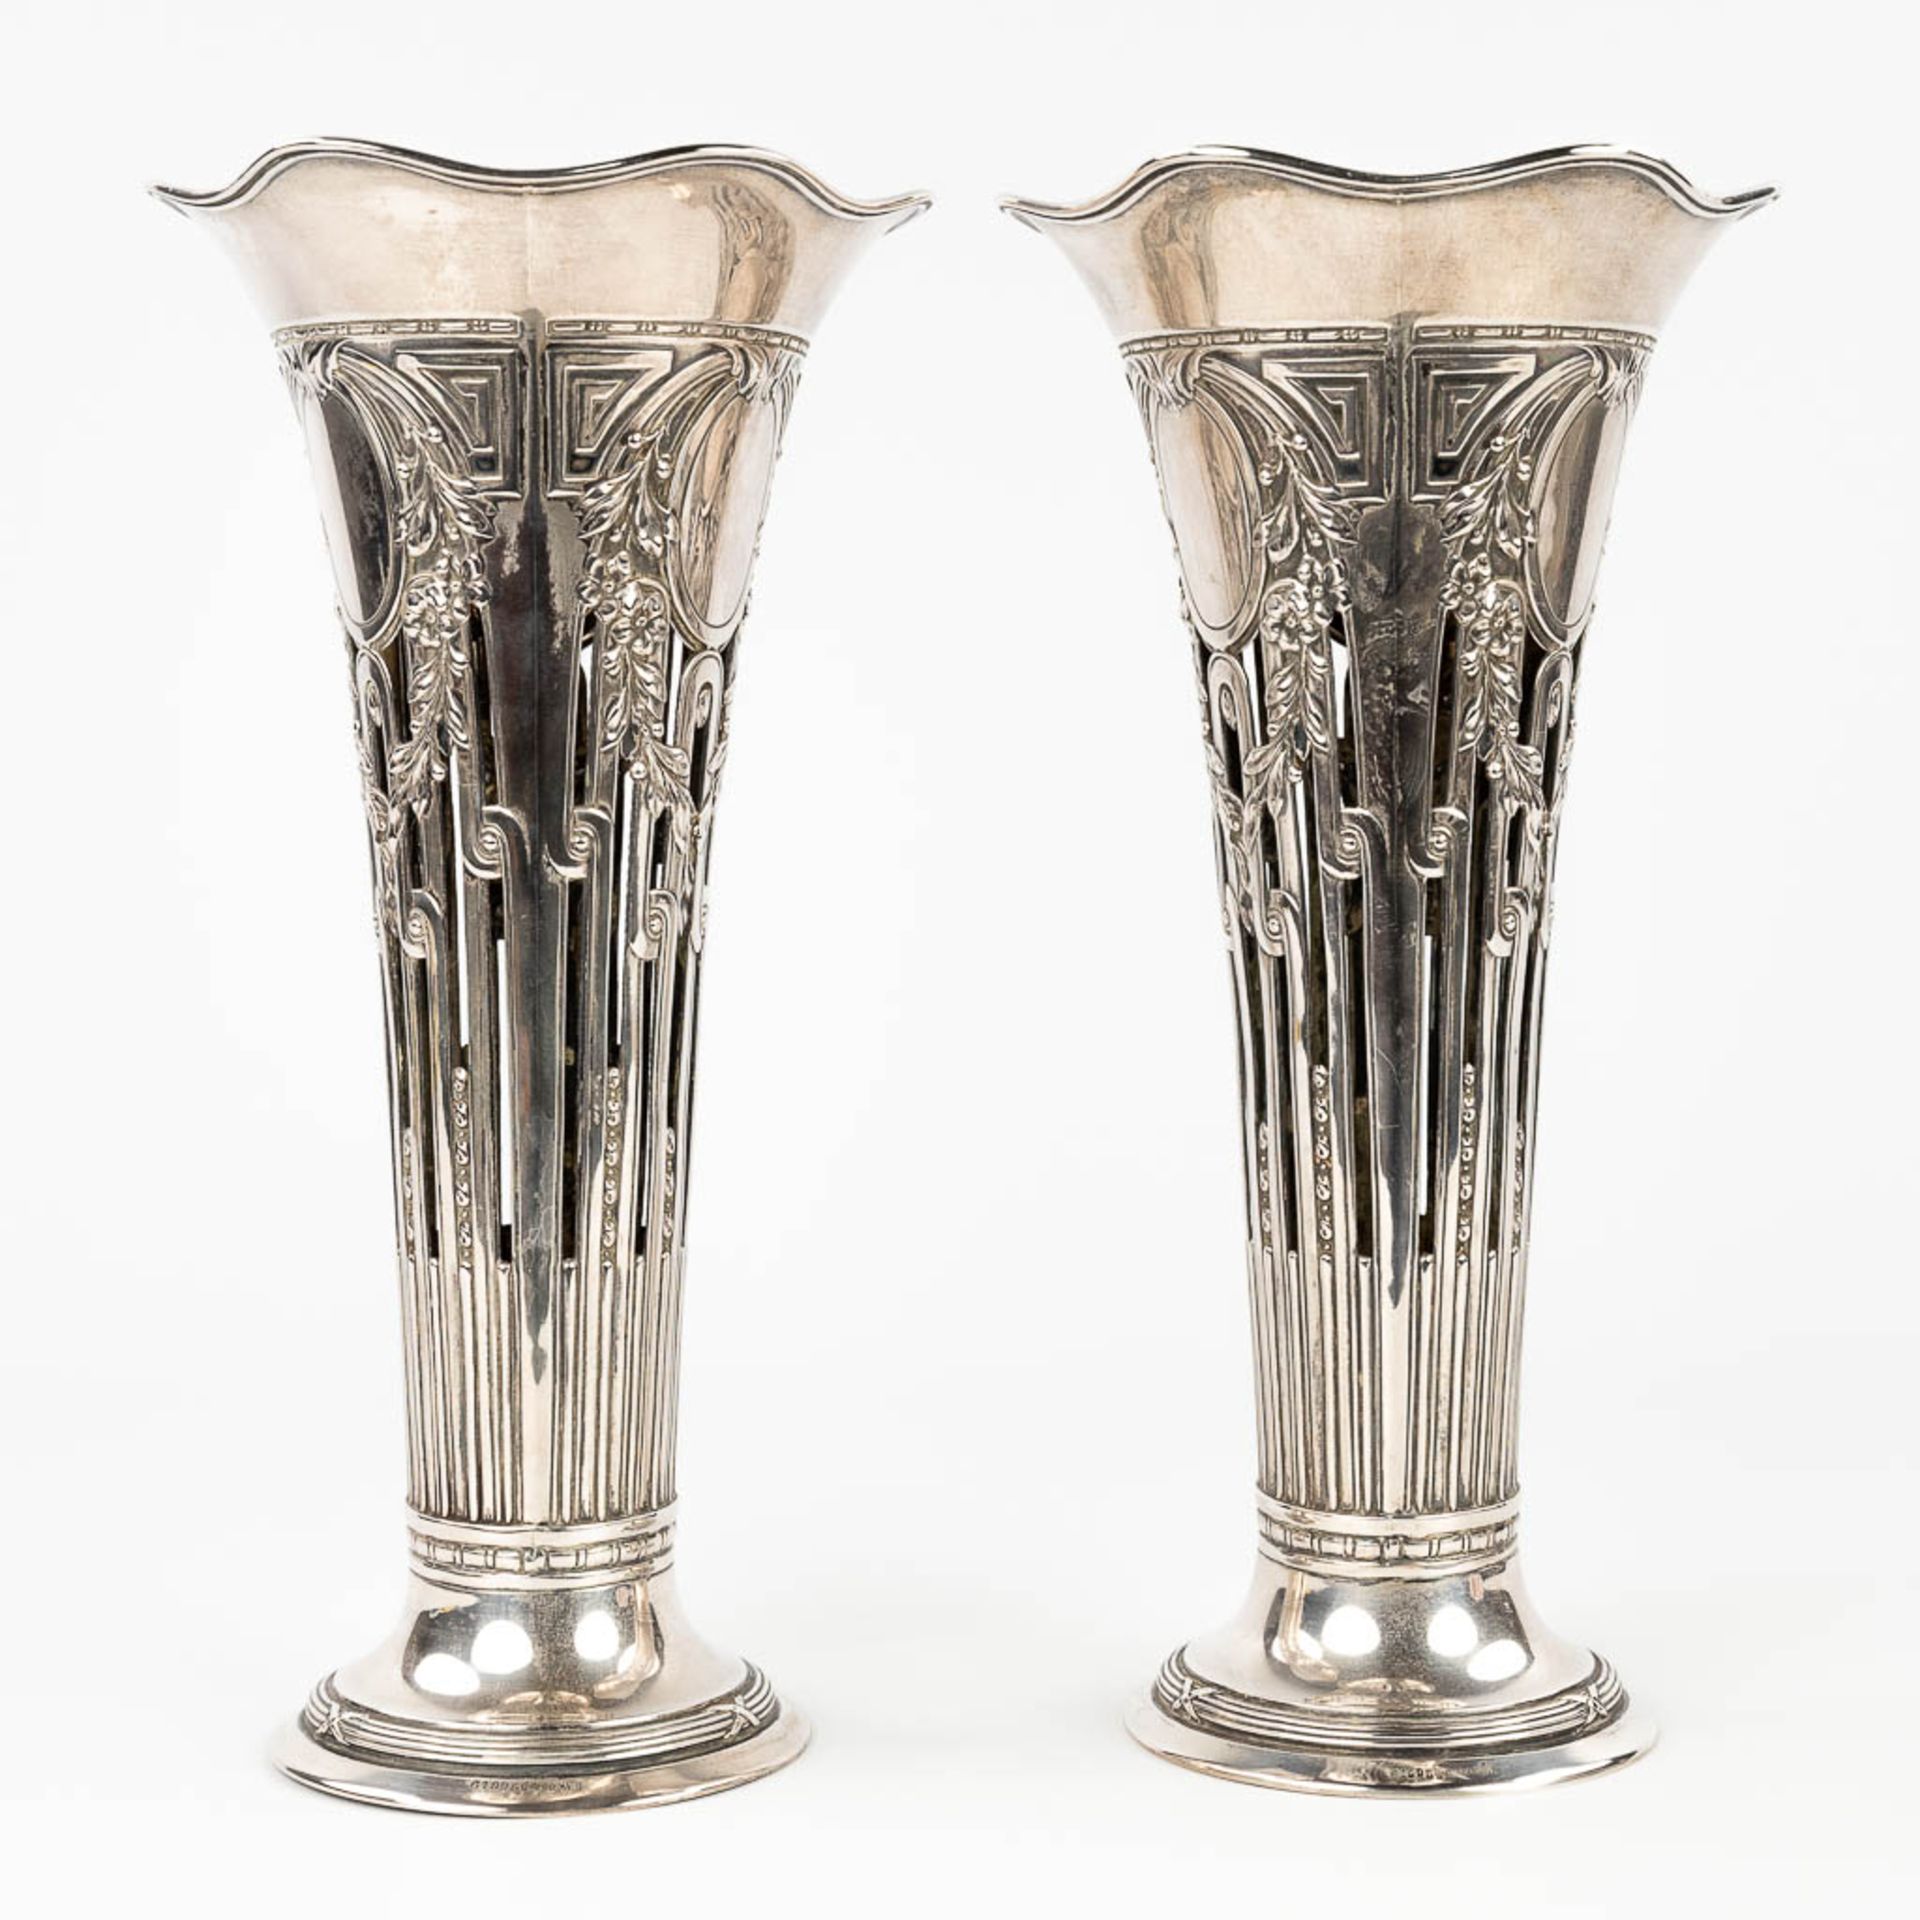 A pair of vases made of silver and marked 800. Made in Germany. 693g. 20th C. (H:31 x D:15,5 cm) - Image 6 of 14